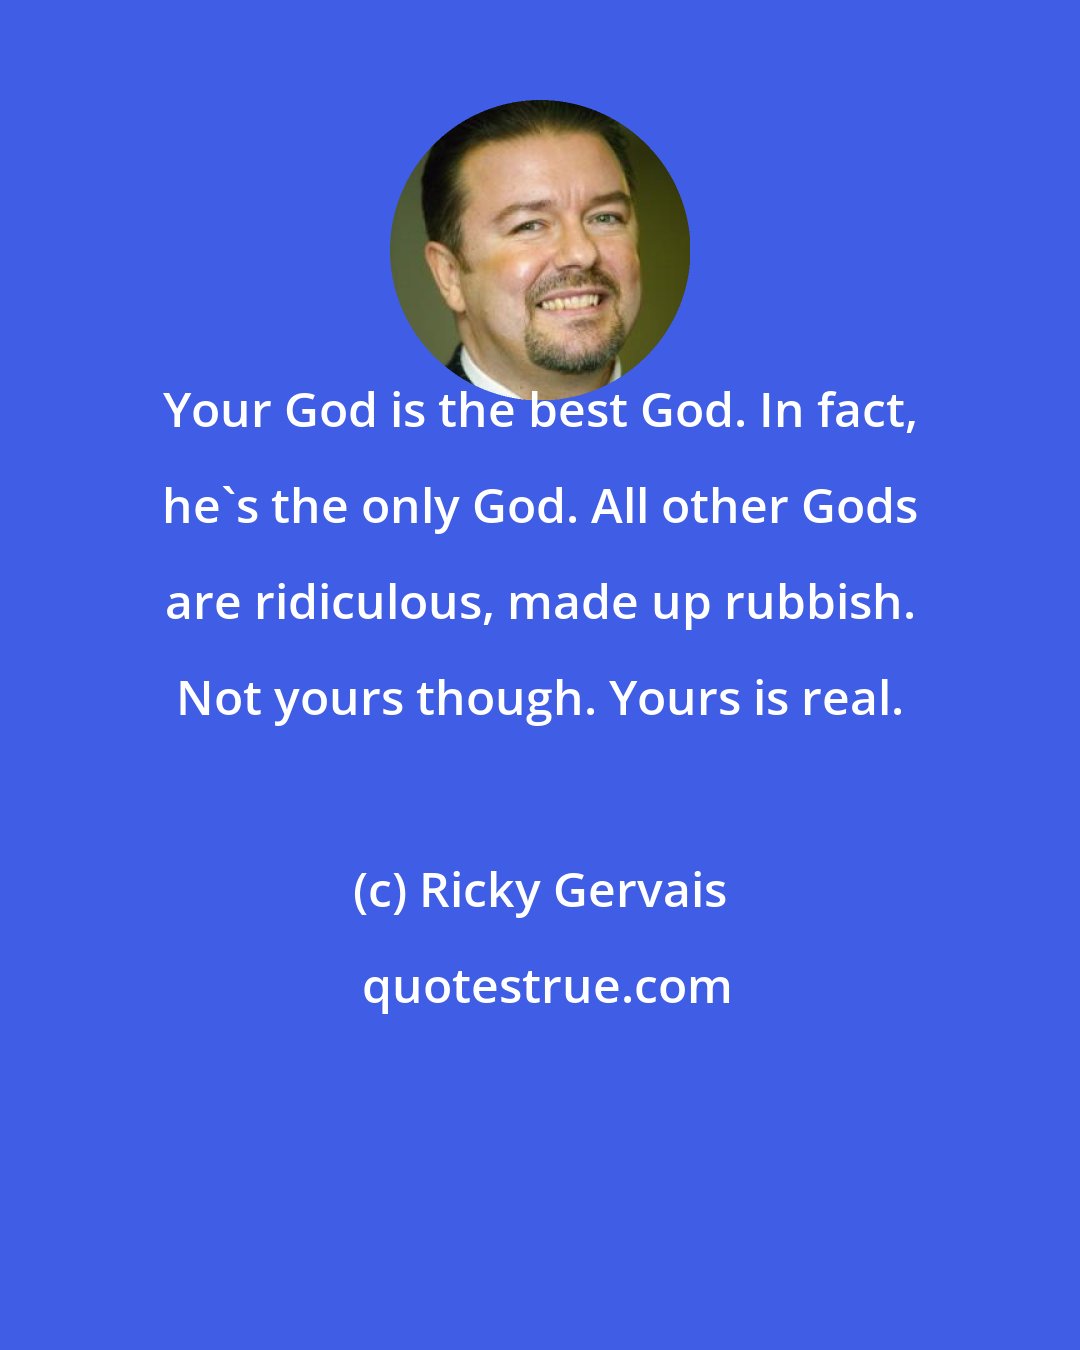 Ricky Gervais: Your God is the best God. In fact, he's the only God. All other Gods are ridiculous, made up rubbish. Not yours though. Yours is real.